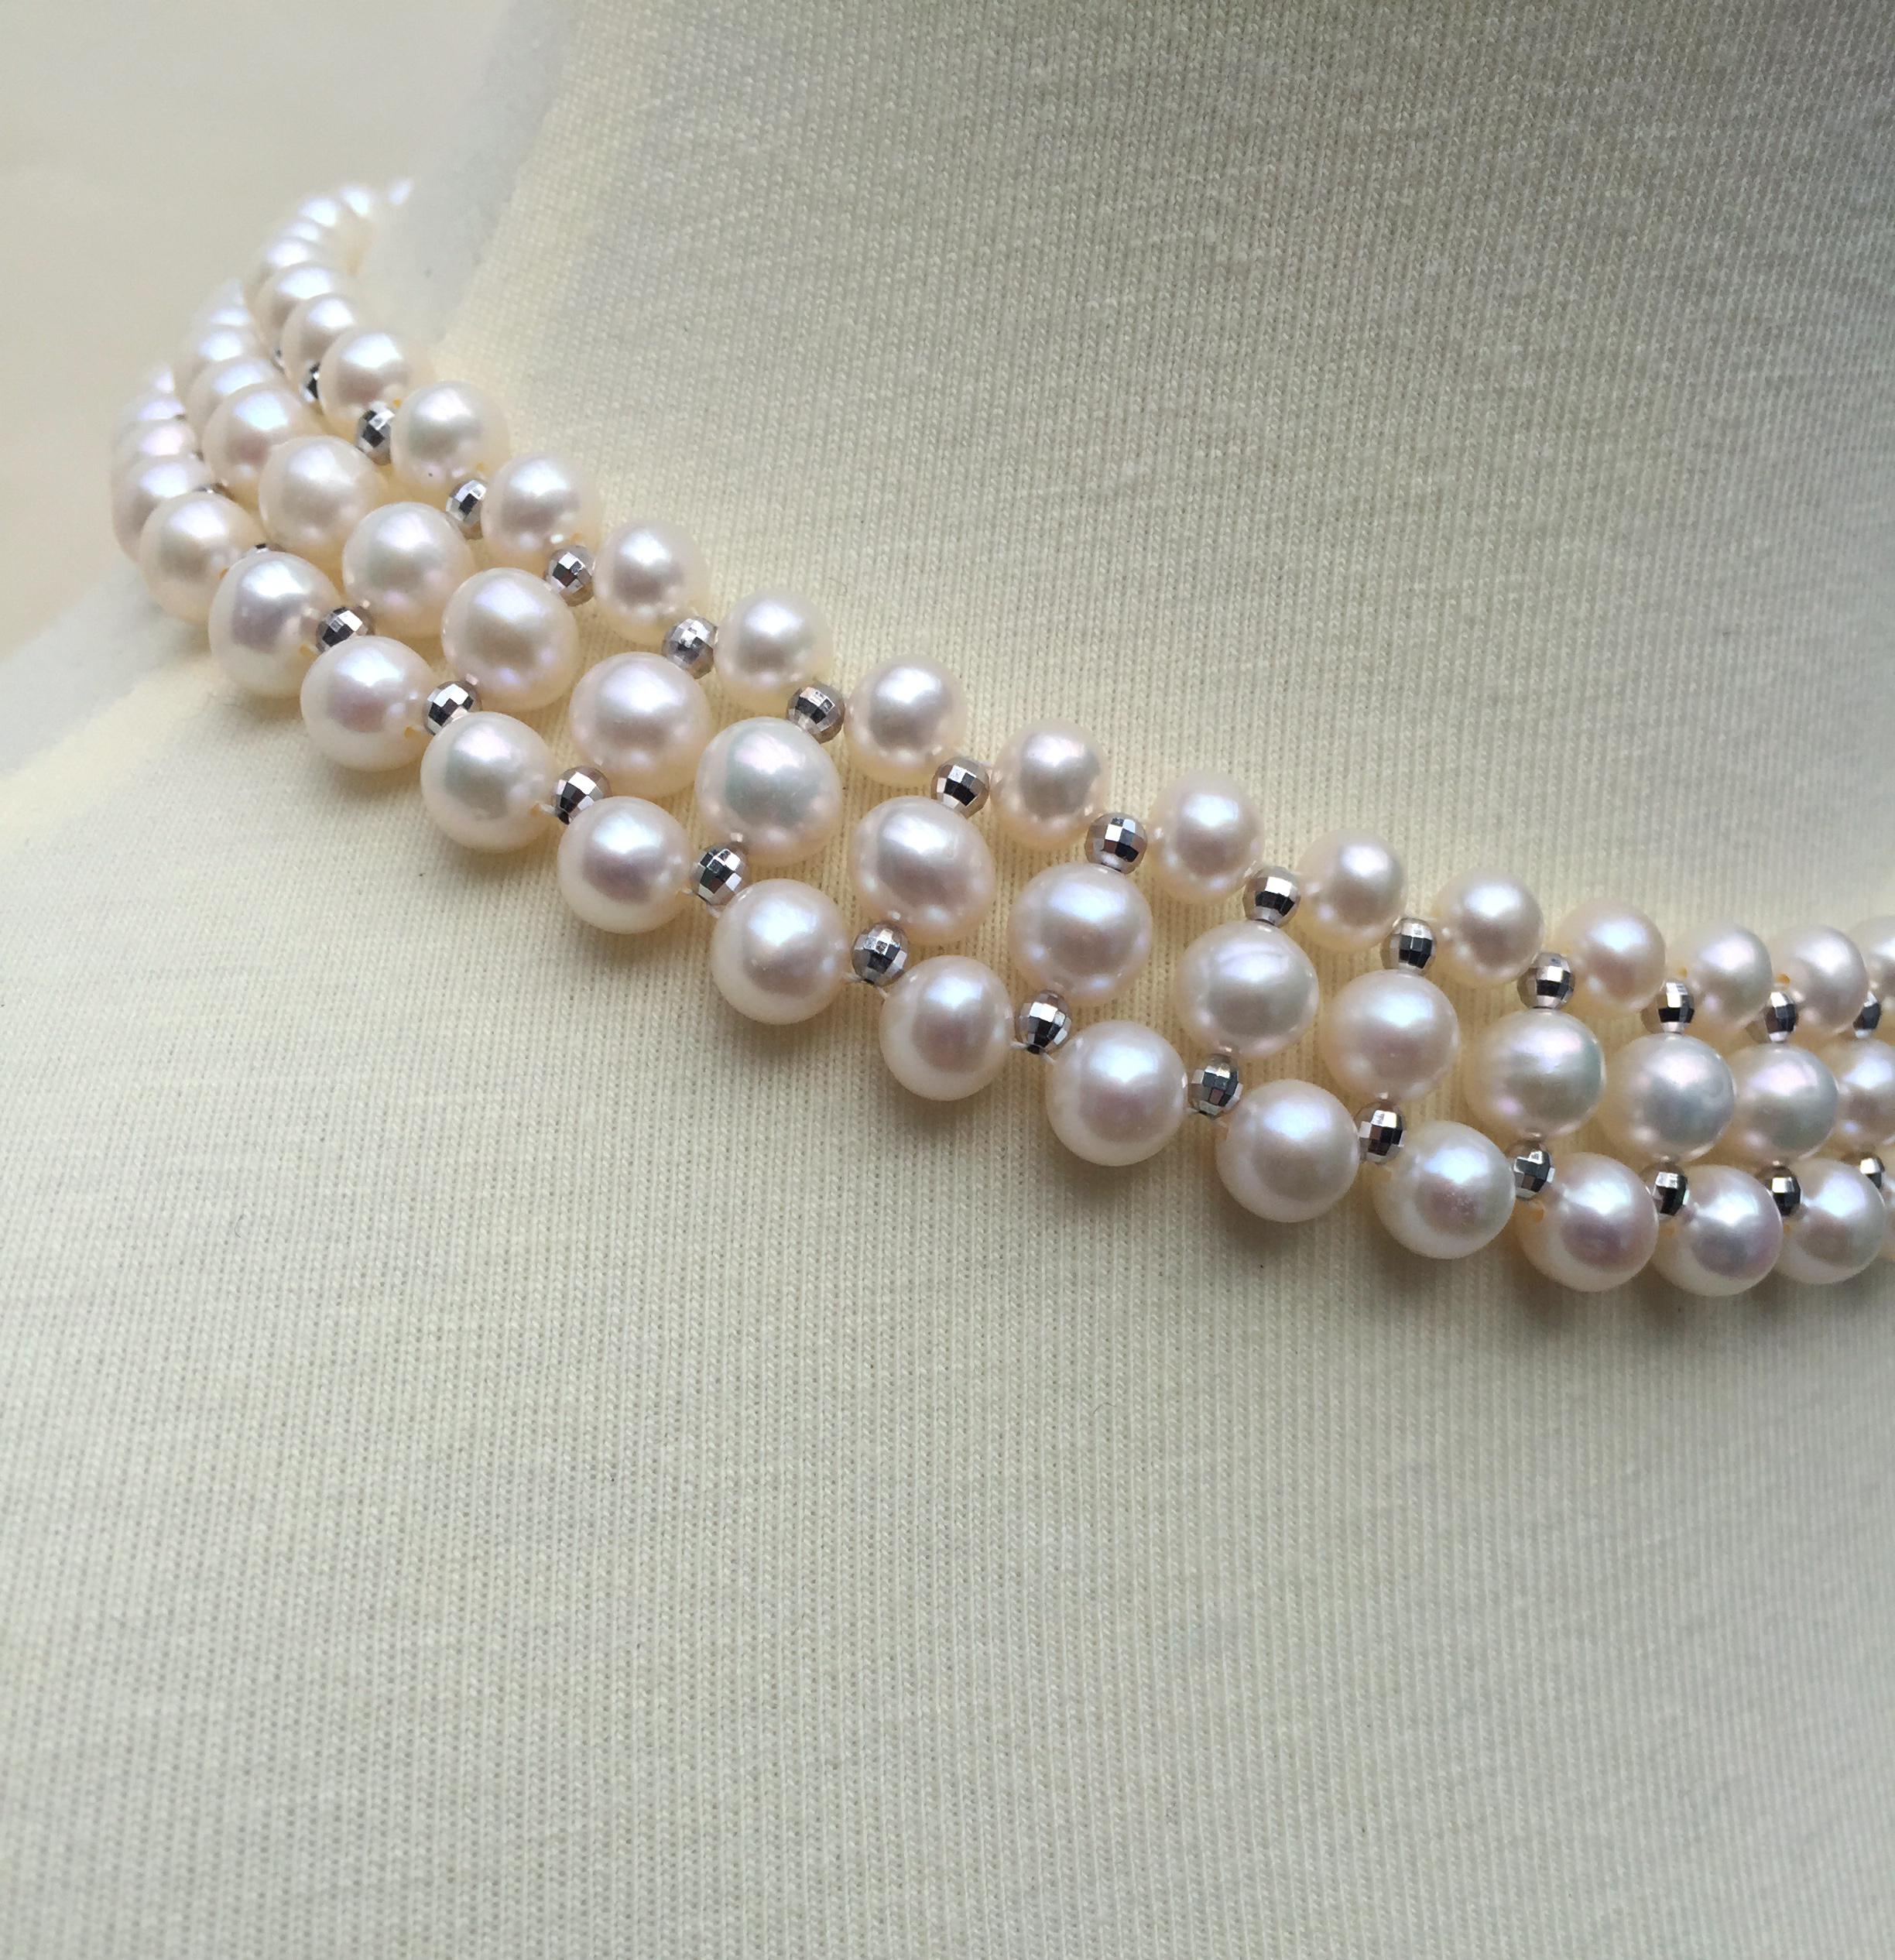 This woven white pearl necklace with 14k white gold faceted beads and sliding clasp glitters beautifully. This classic necklace is handmade by Marina J. with 14k white gold faceted beads and glowing white pearls woven together in an elegant design.